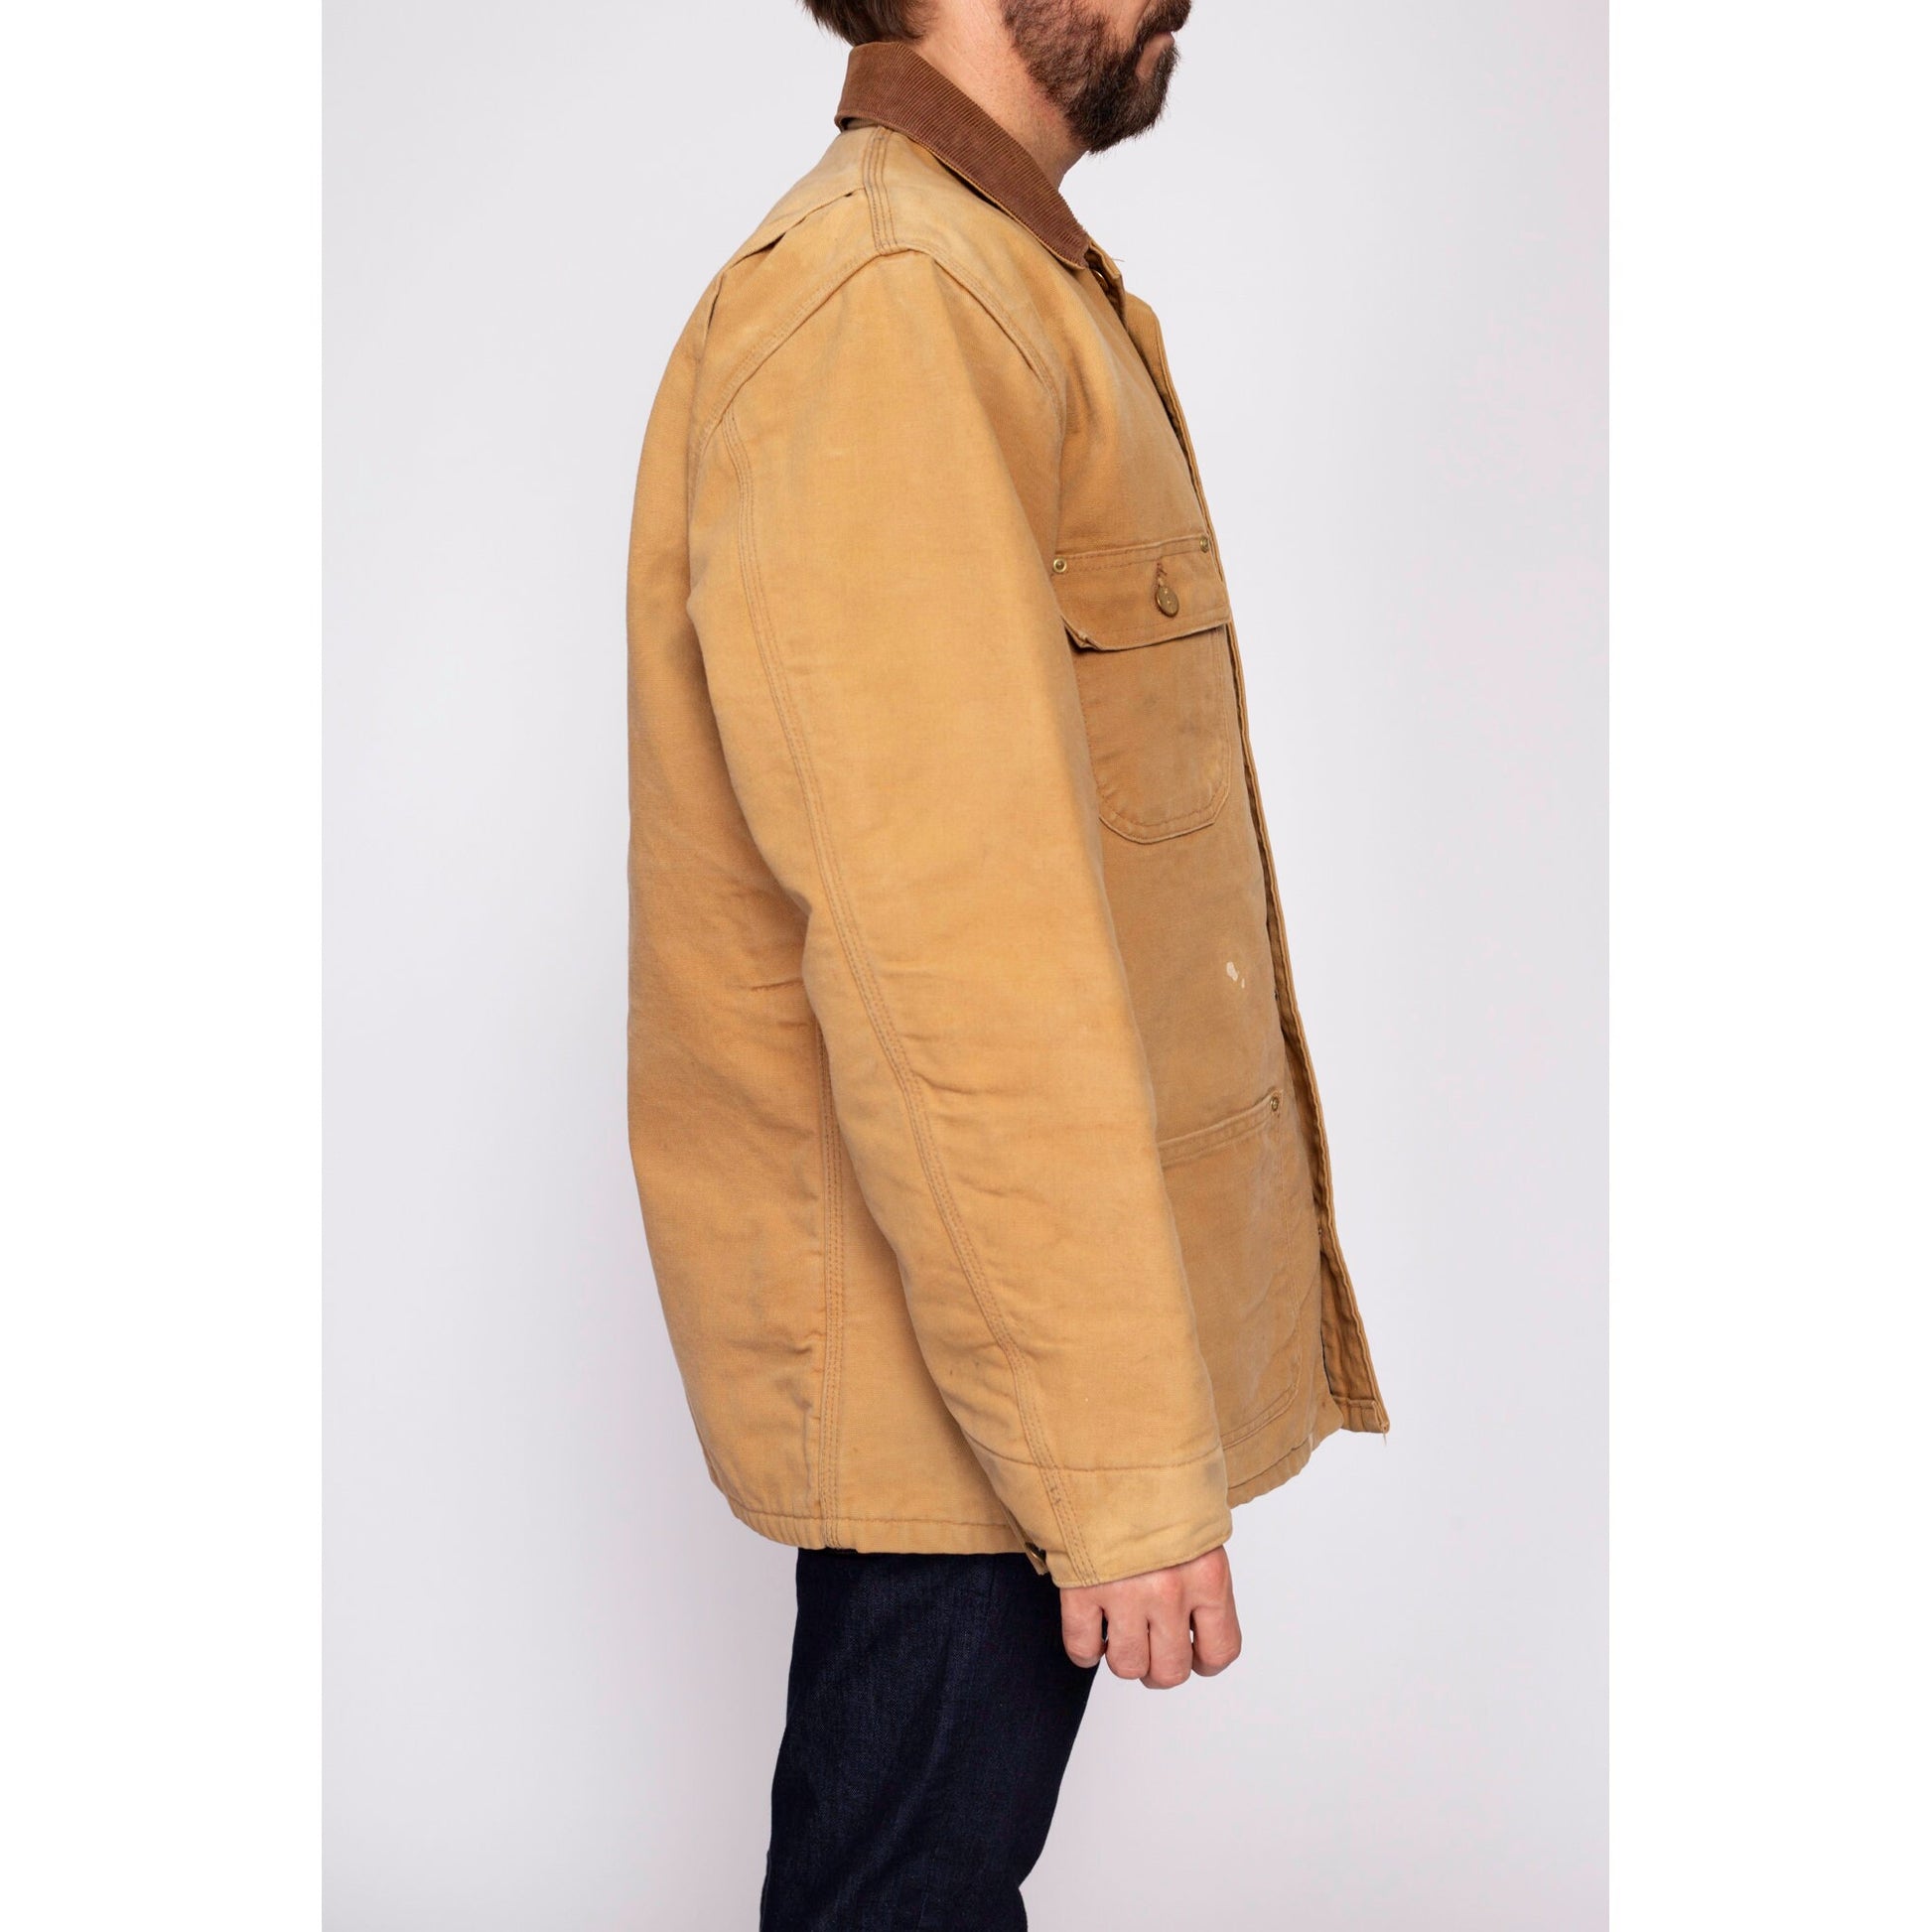 Vintage Carhartt Blanket Lined Chore Coat - 44 Tall | 90s Tan Canvas Duck Corduroy Collar Union Made Workwear Jacket